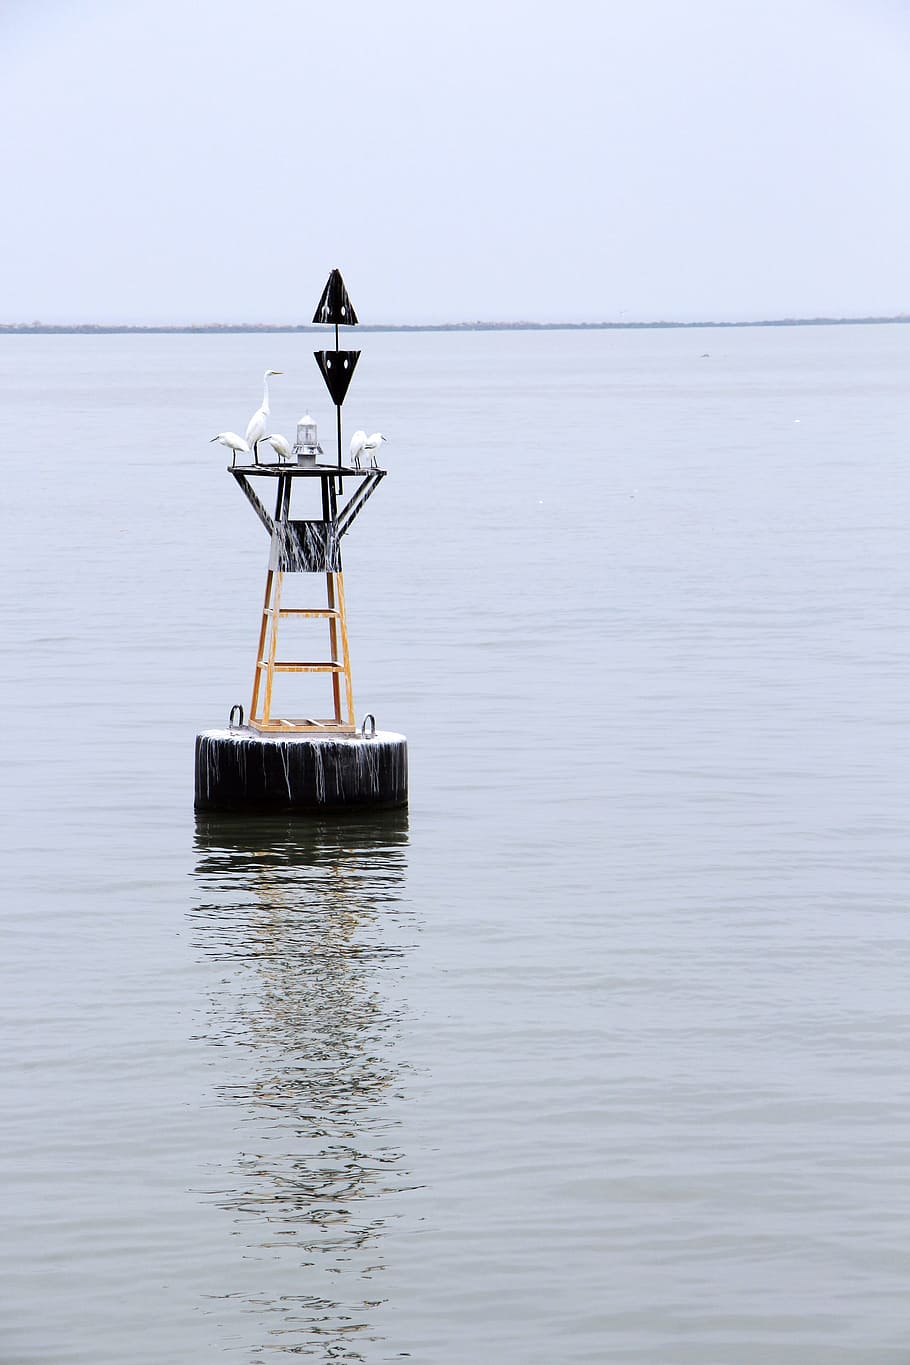 Sea, Buoy, Bird, Simple, Design, water, day, outdoors, nature, waterfront